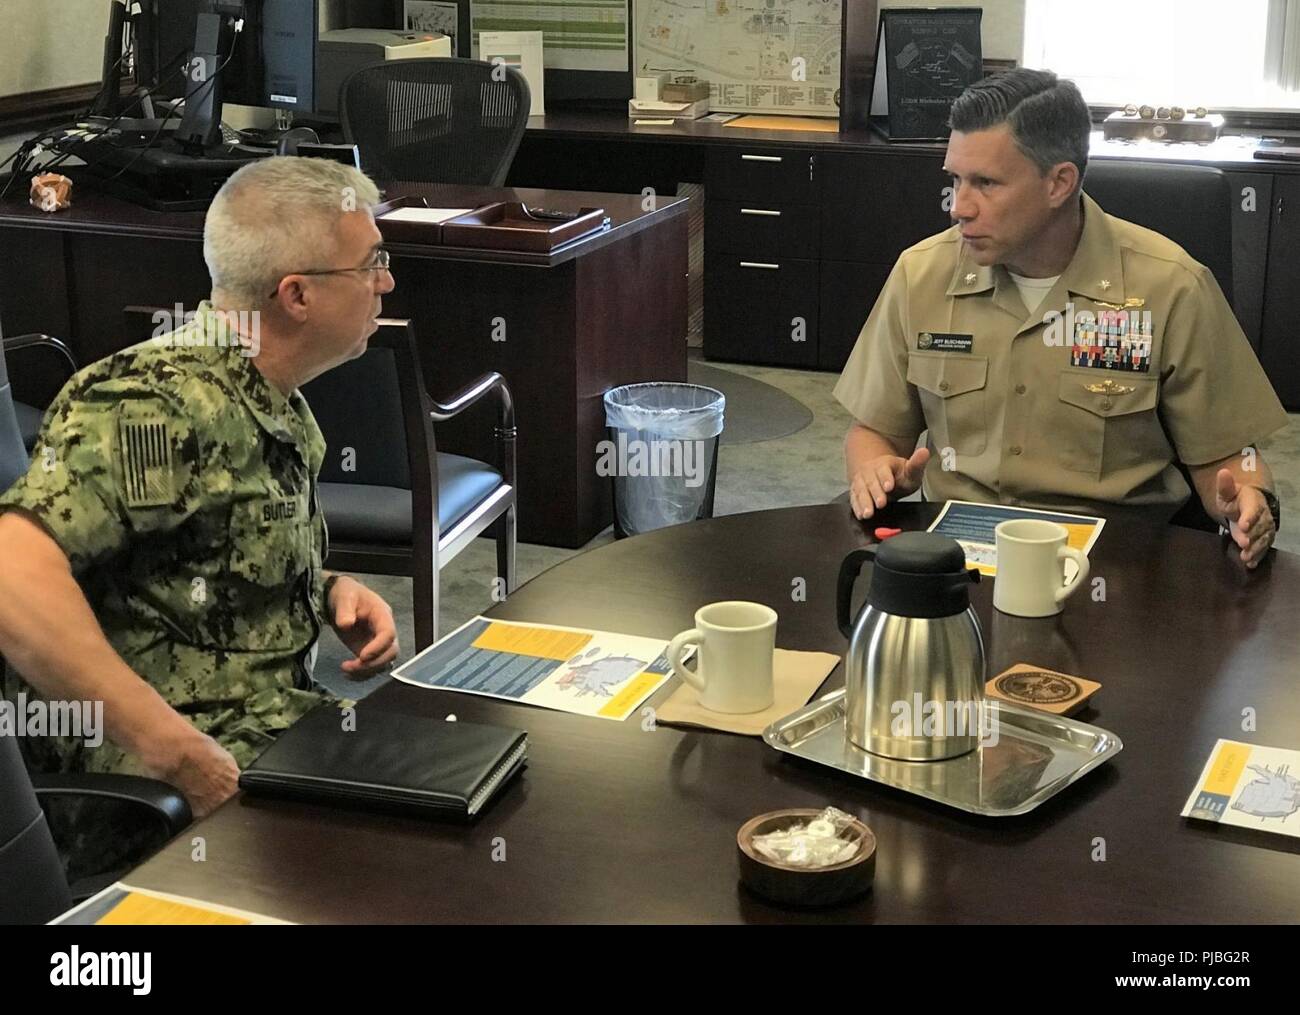 Fla. (July 12, 2018) Rear Adm. James M. Butler (left), deputy commander, U.S. Fleet Cyber Command/U.S. 10th Fleet, met with the Center for Information Warfare Training's (CIWT) Executive Officer Cmdr. Jeffrey Buschmann and other CIWT leaders to learn more about the CIWT domain. While visiting, Butler also toured Information Warfare Training Command  Corry Station courses and met with students. Stock Photo